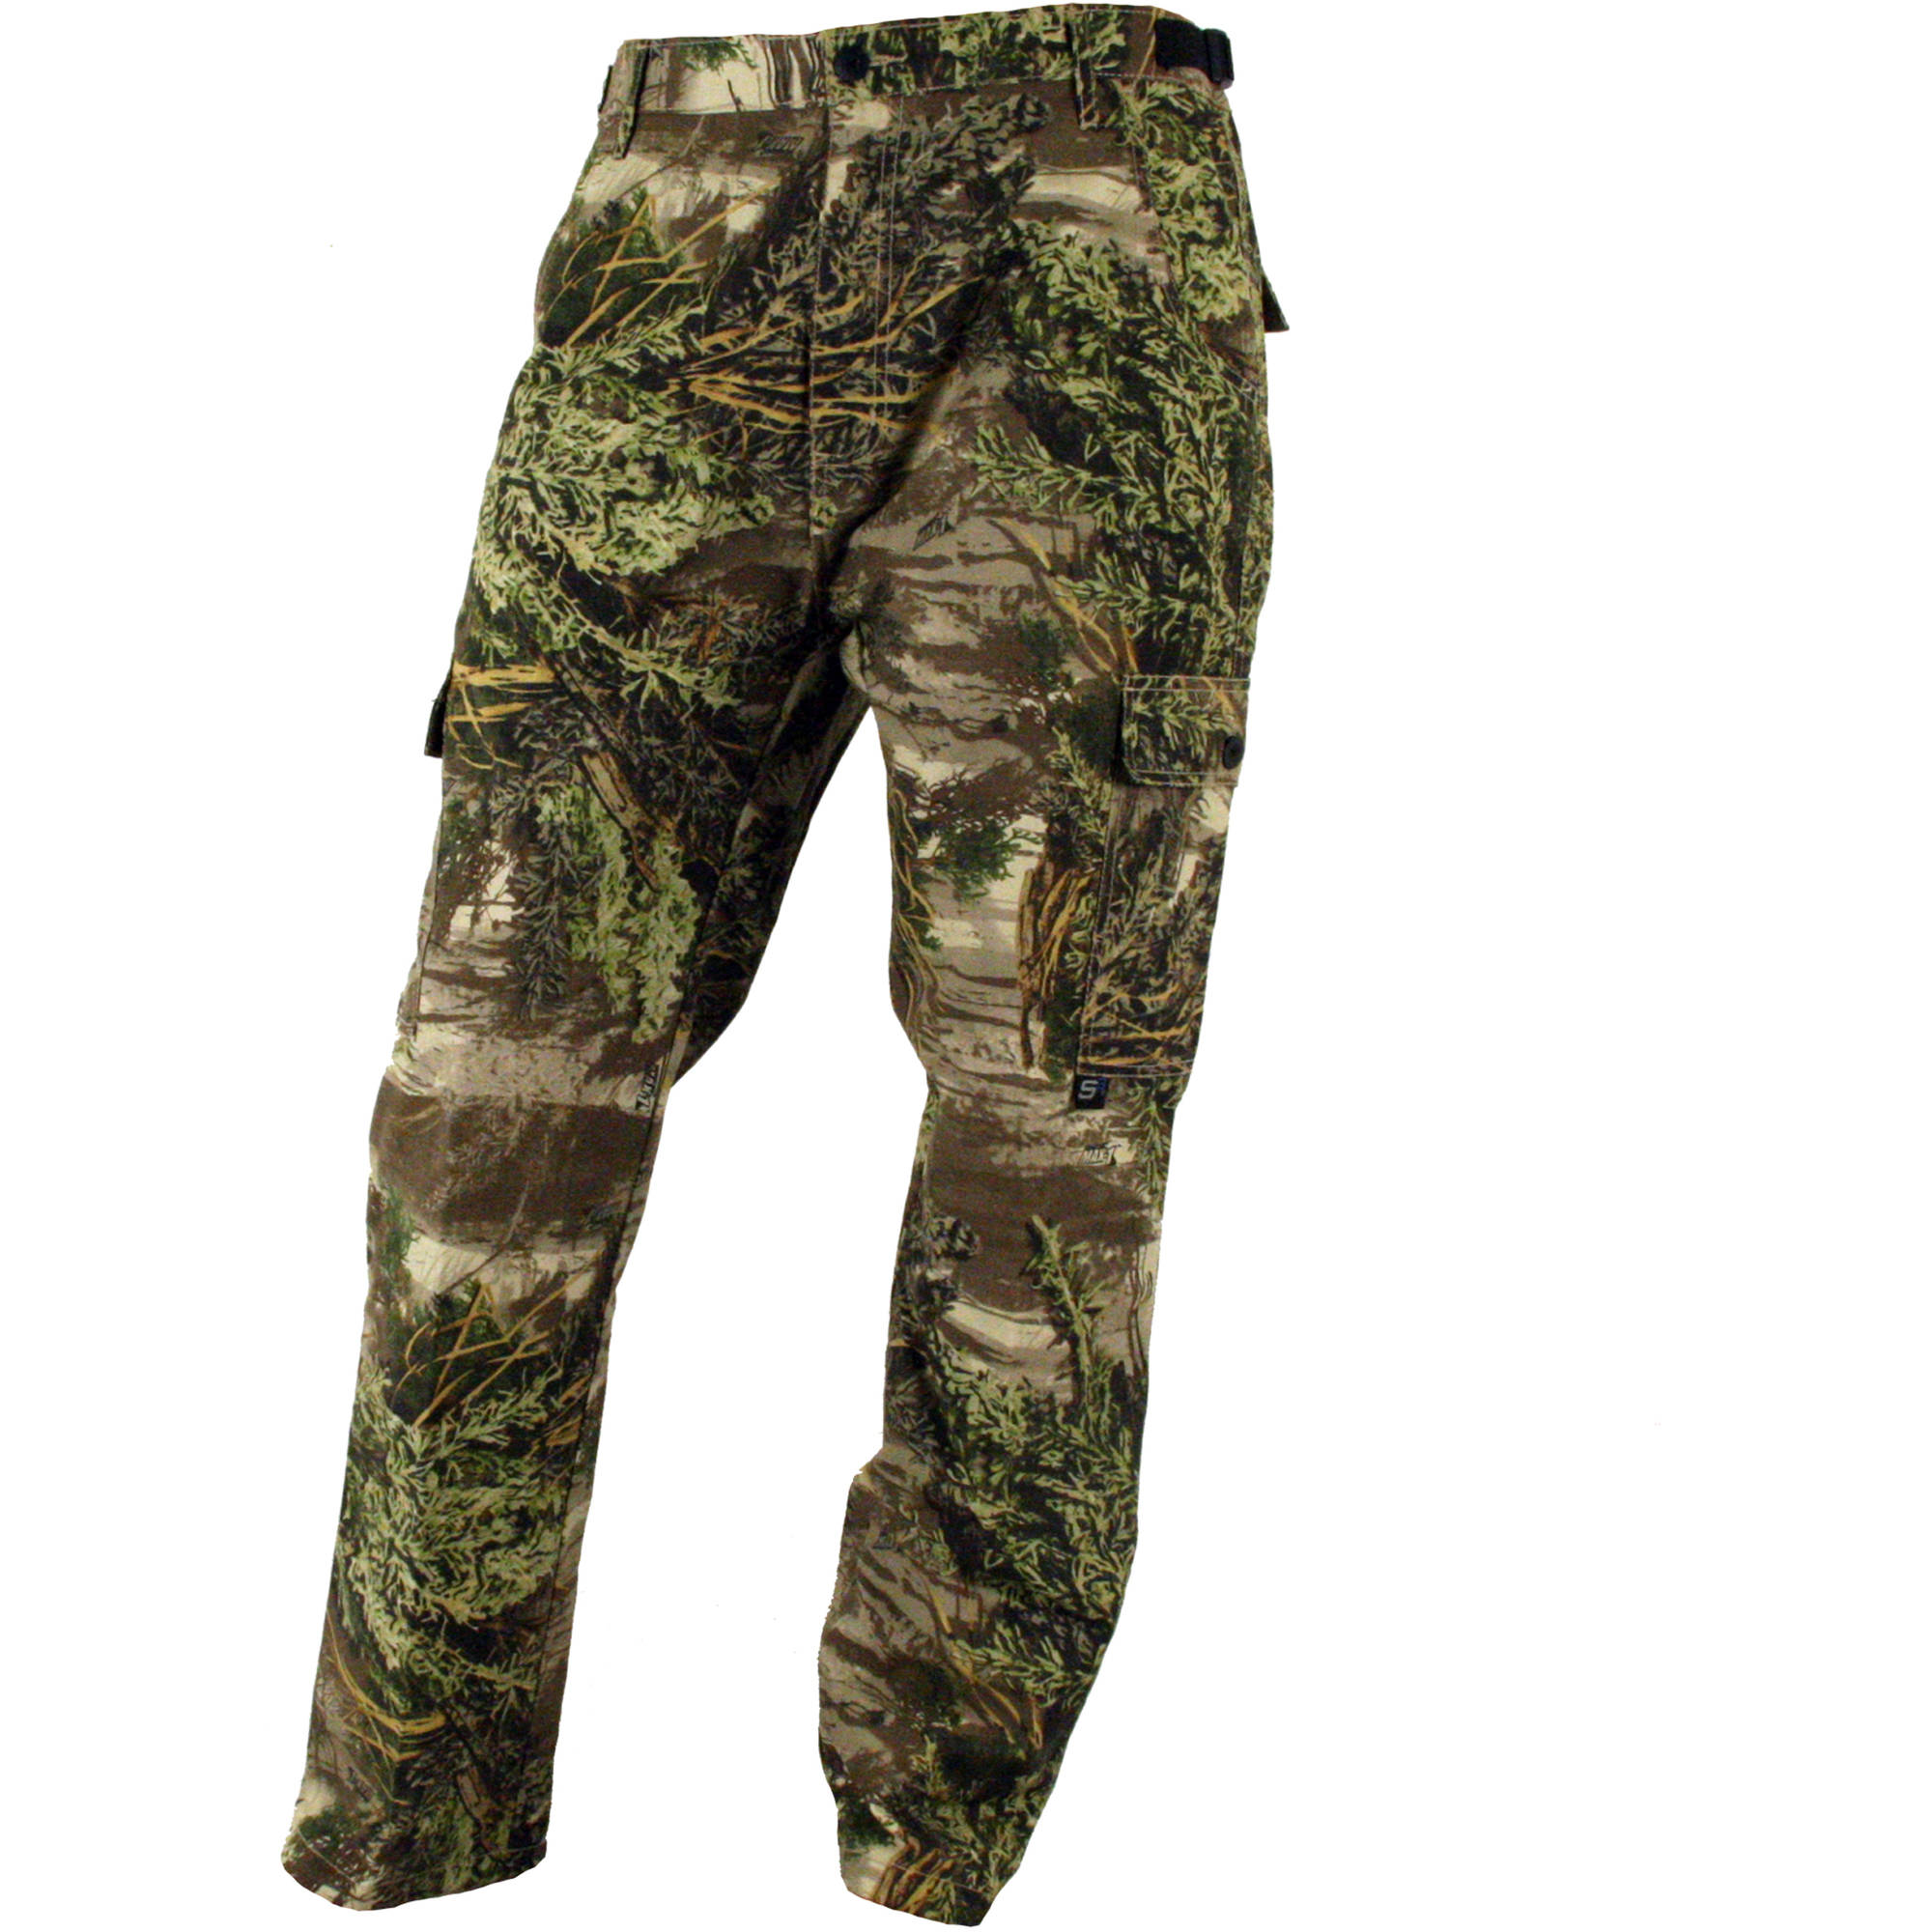 menu0027s s3 silver infused anti-microbial camo pants scentblocker, available  in multiple sizes - walmart.com SRBAEDL